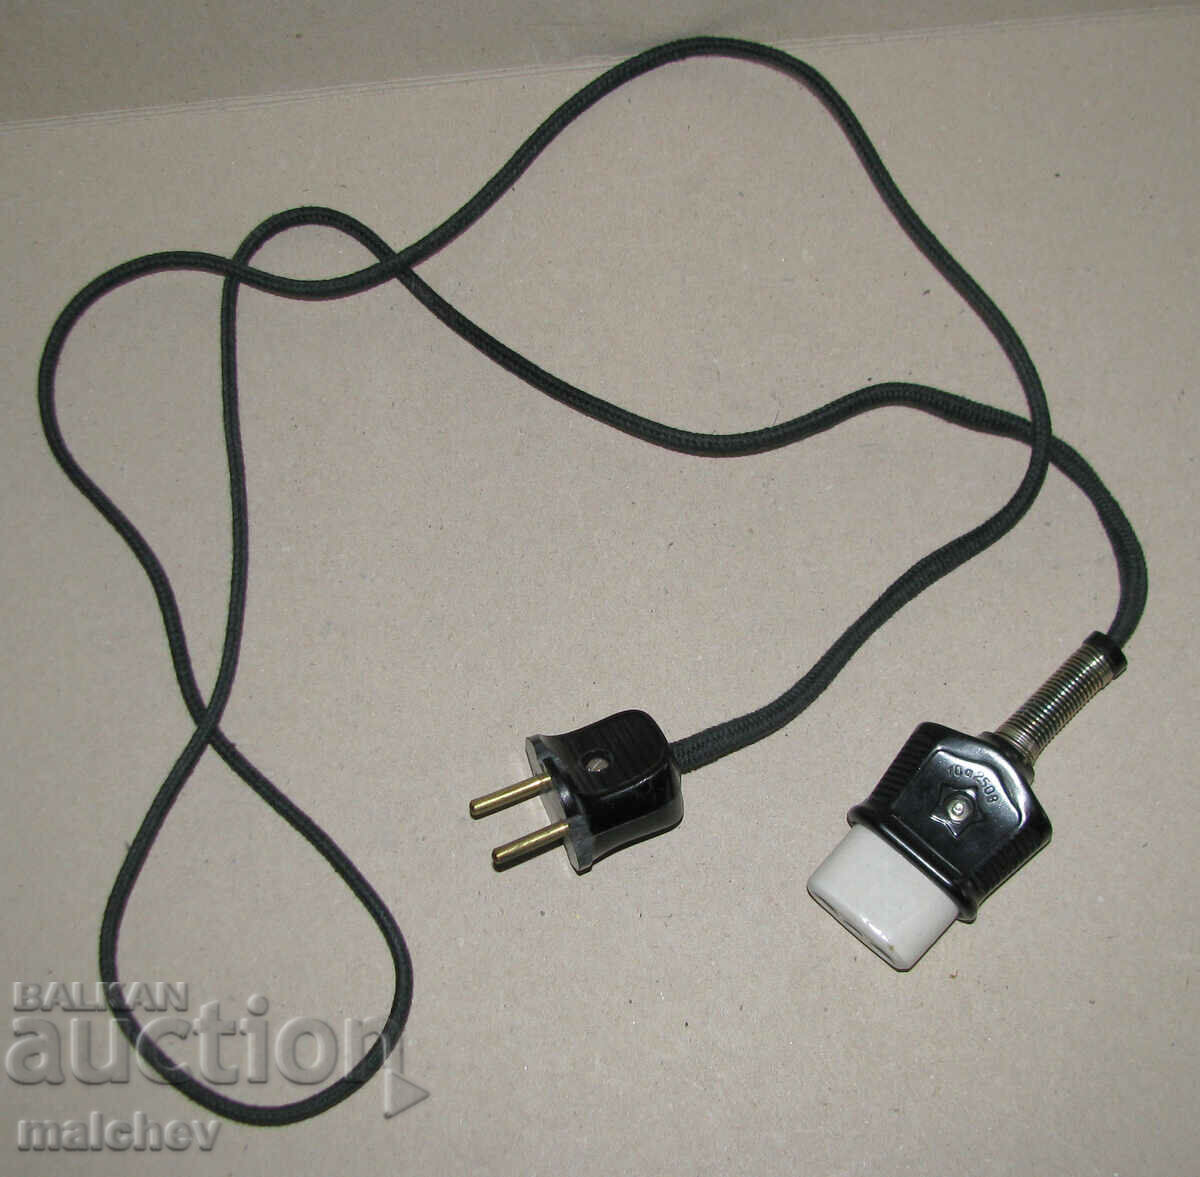 Extension cable 1.5 m with plug for stoves and toasters, excellent